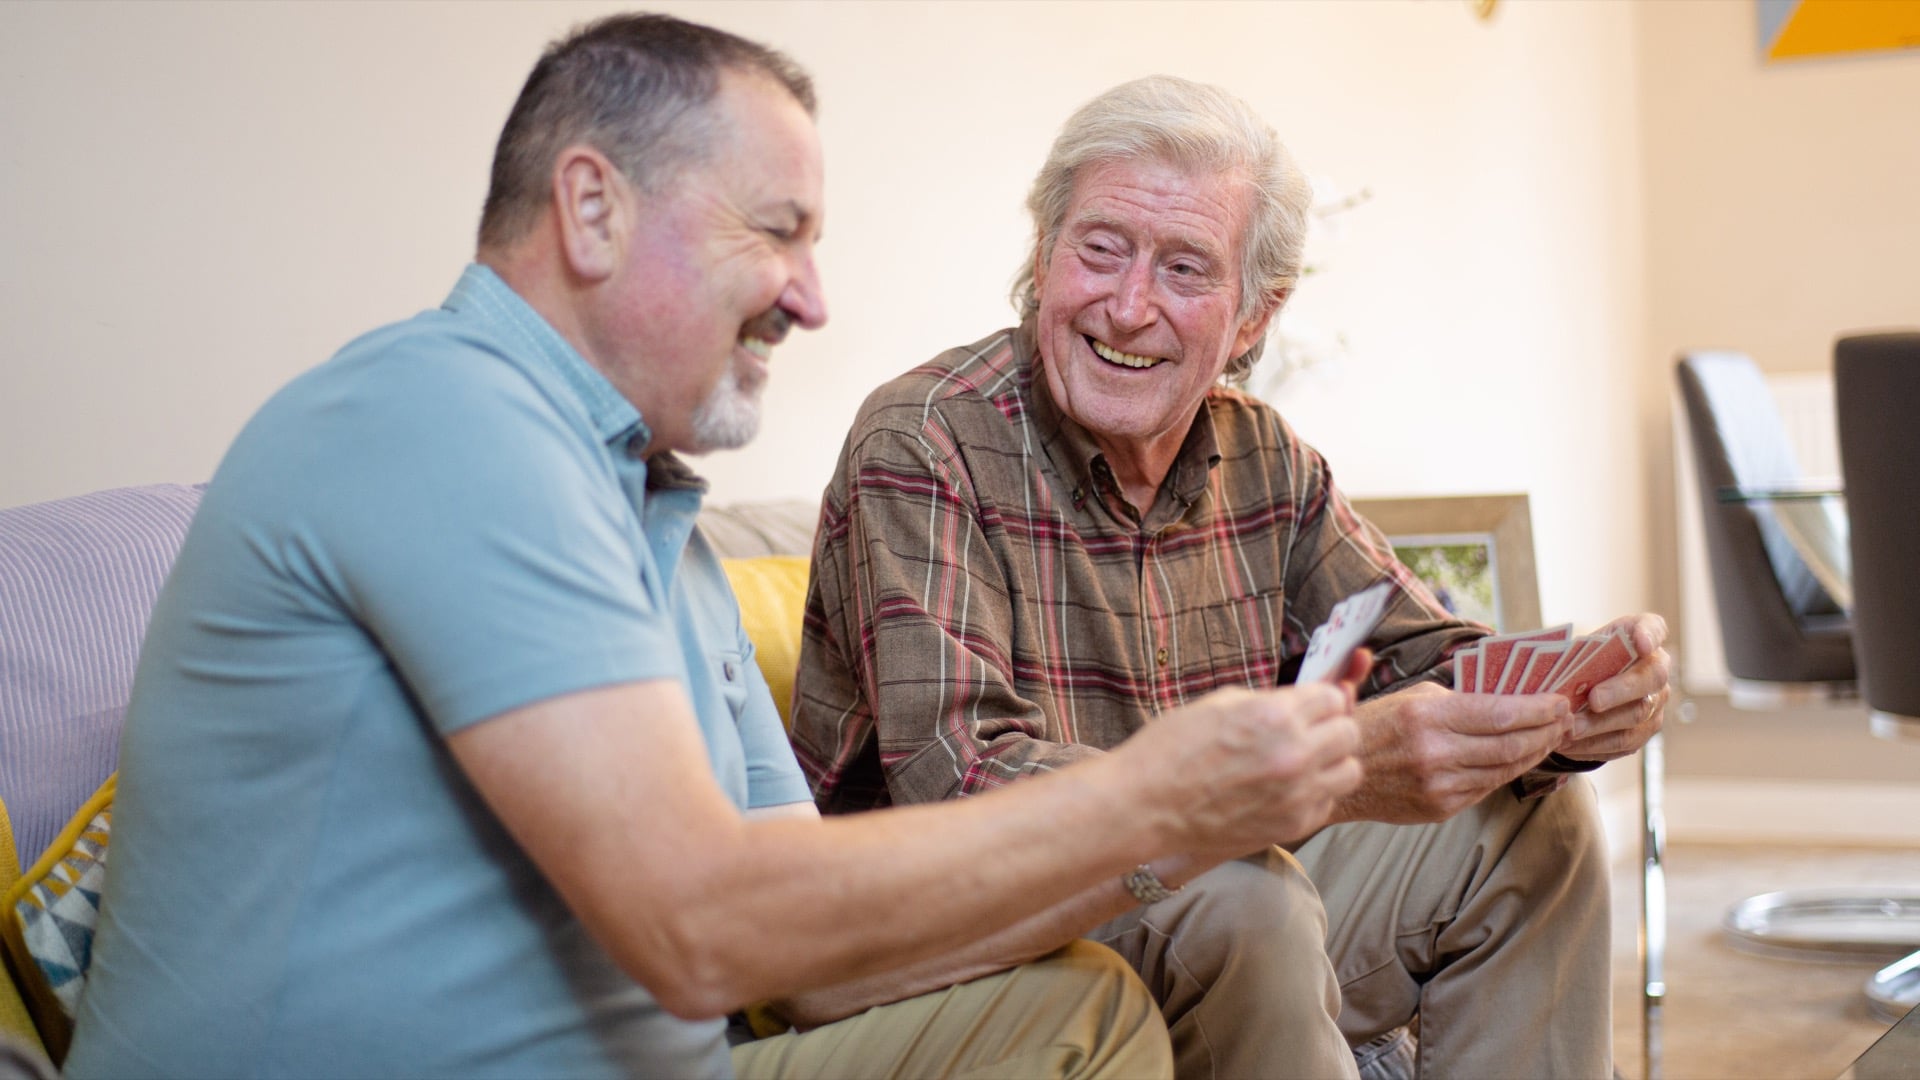 Male carer sitting on sofa elderly male playing cards